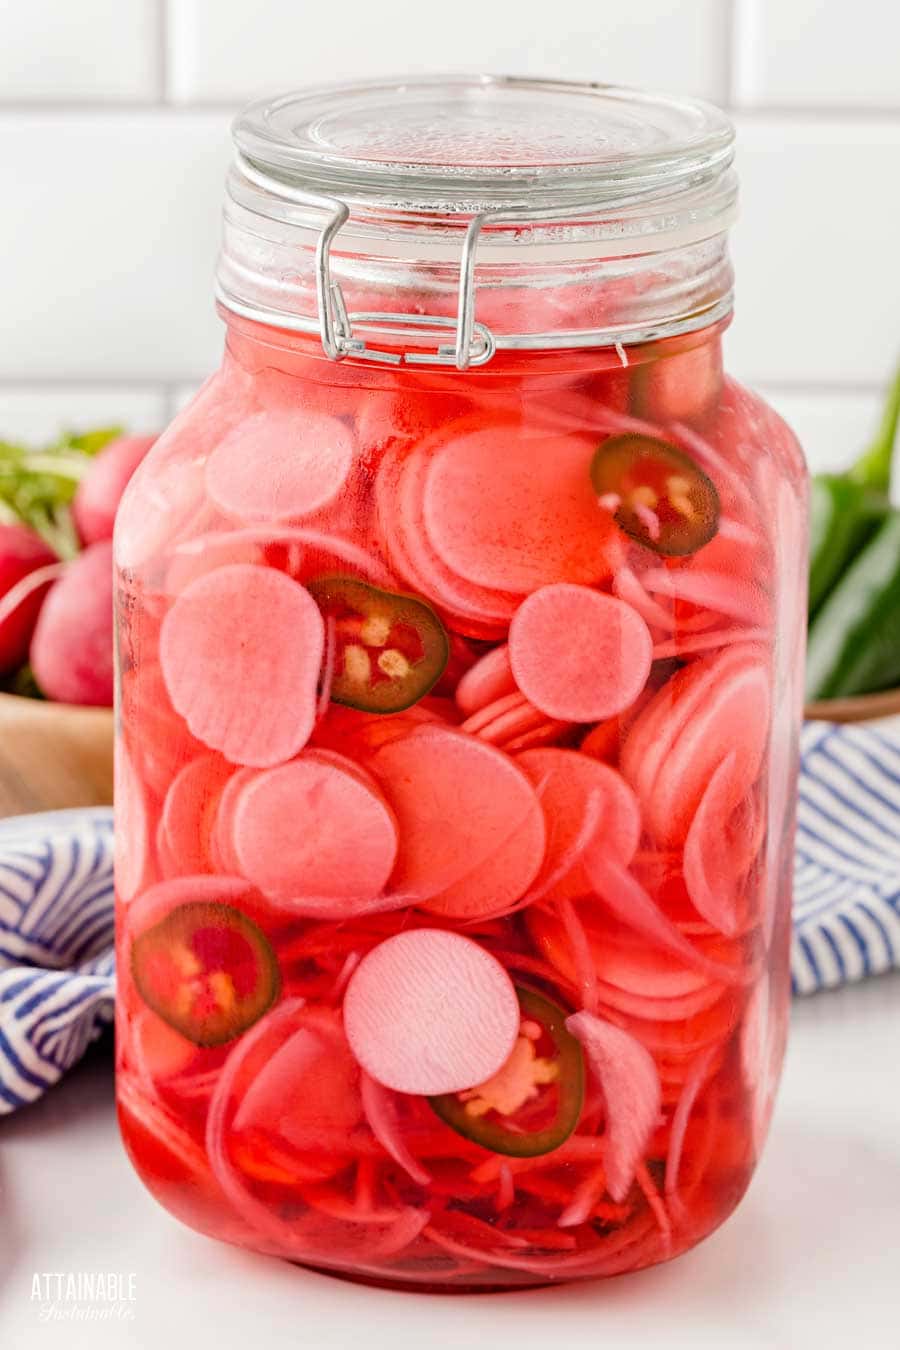 Radishes after pickling; the brine has turned pink.